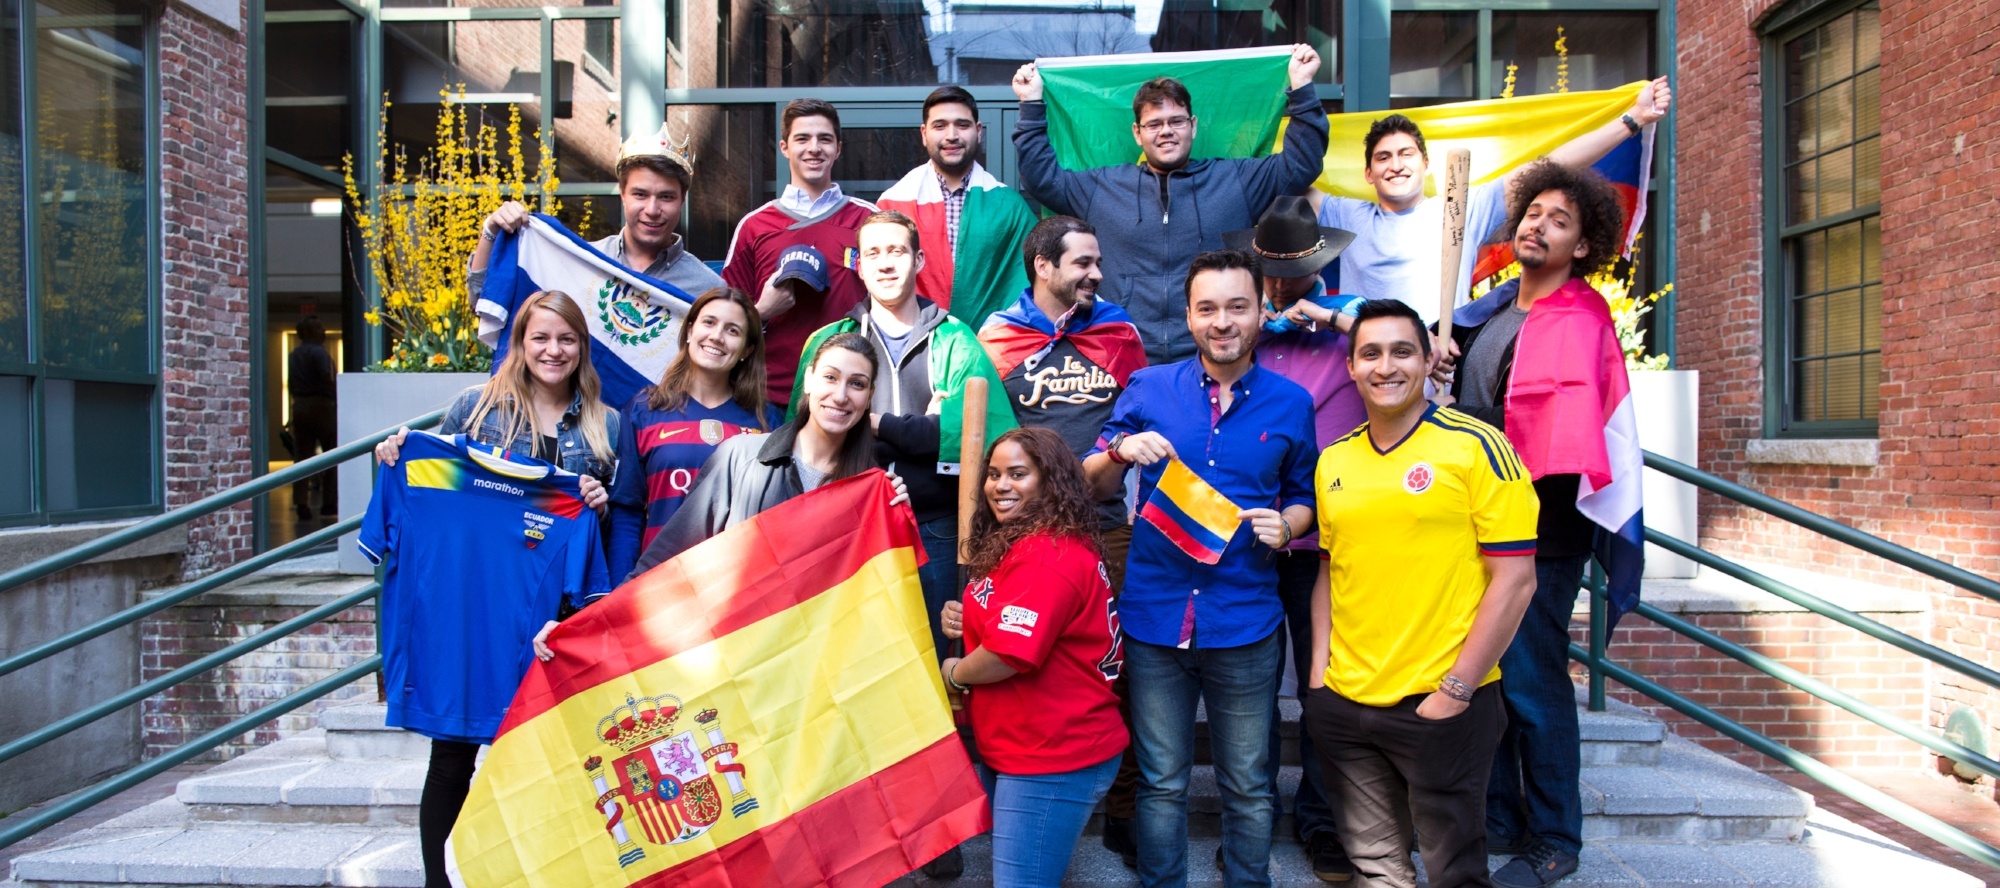 Bringing Your Authentic Self to Work: Why We Celebrate Hispanic Heritage Month